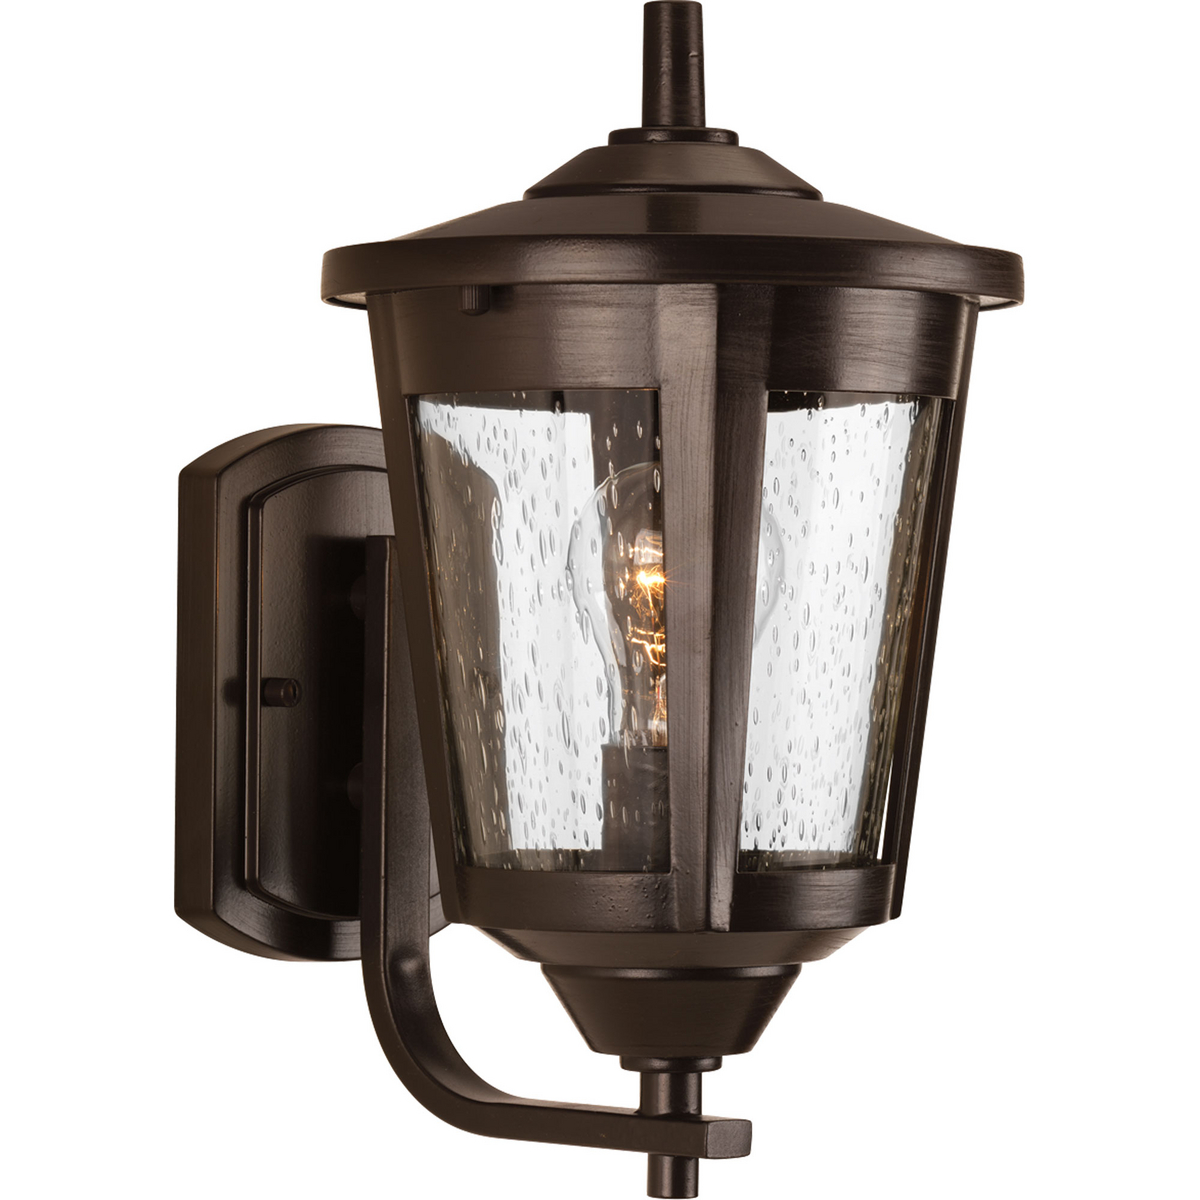 The East Haven Collection offers modern styling to complement a wide variety of home styles. The one-light medium outdoor wall lantern has an Antique Bronze frame that cradles a seeded glass shade. Hanging, wall and post mounting fixtures complete the collection.